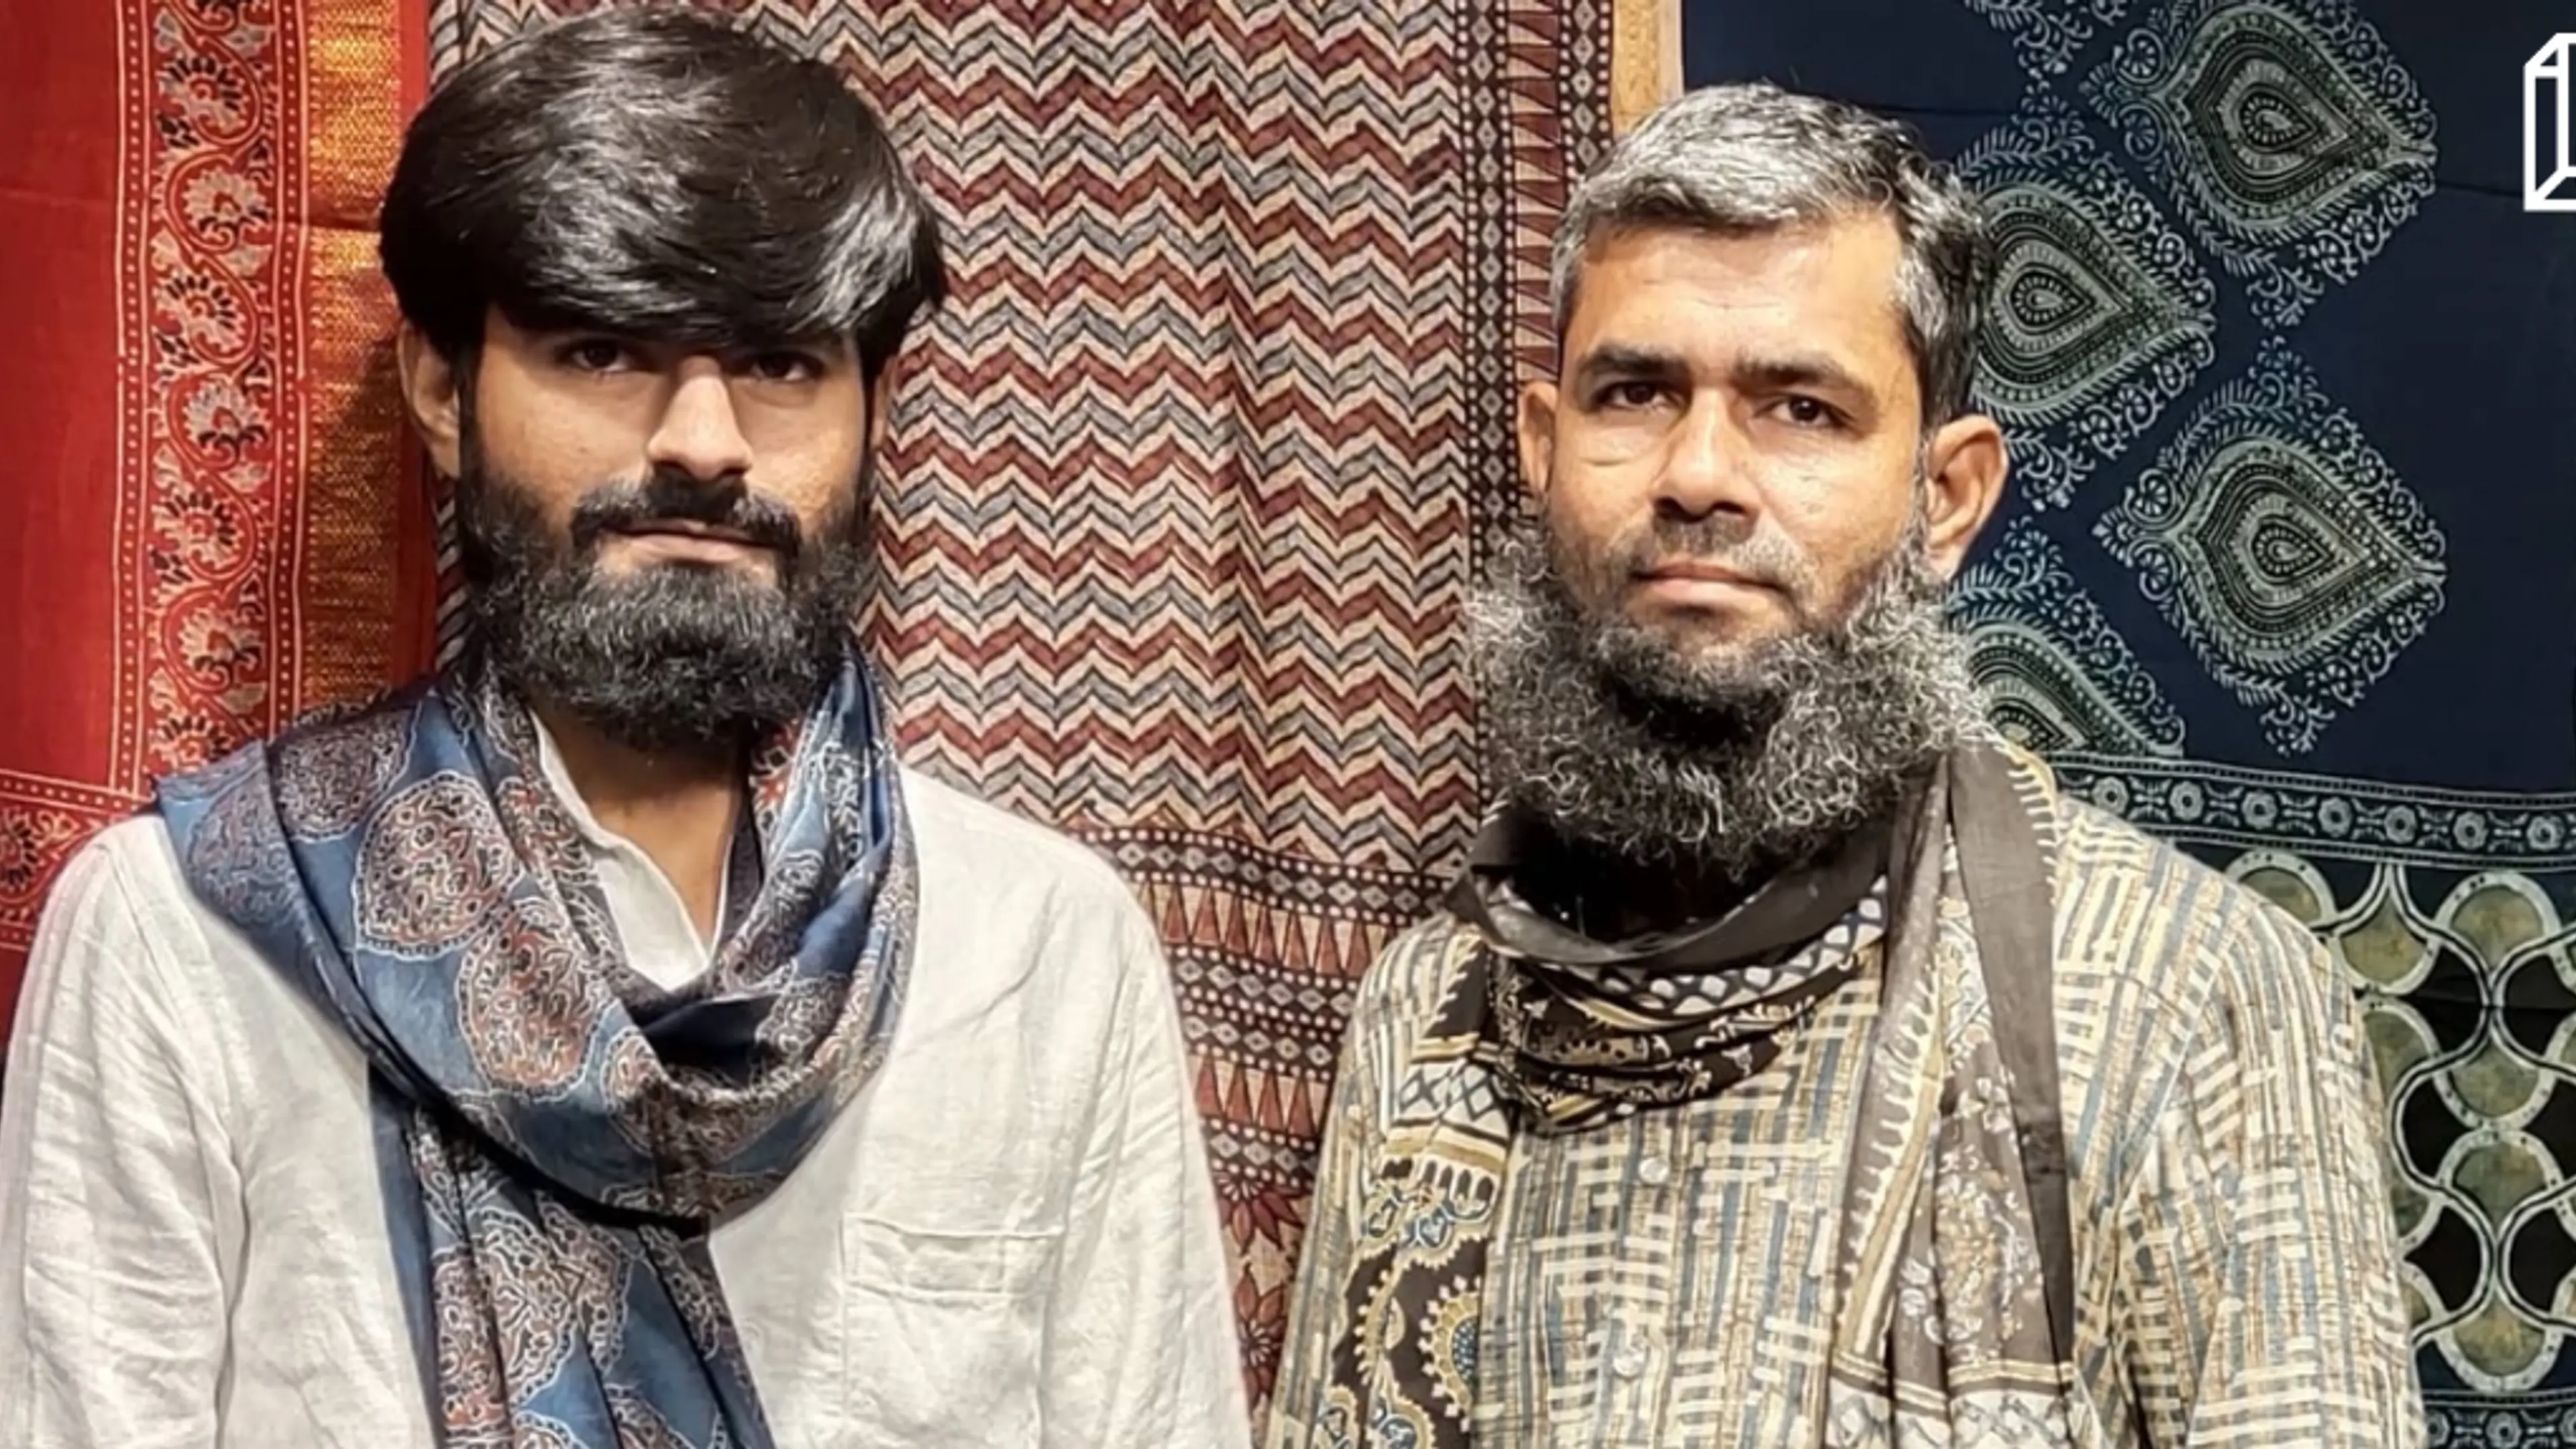 Uncle-nephew duo Jabbar & Mubin want to take ajrakh craft to the world